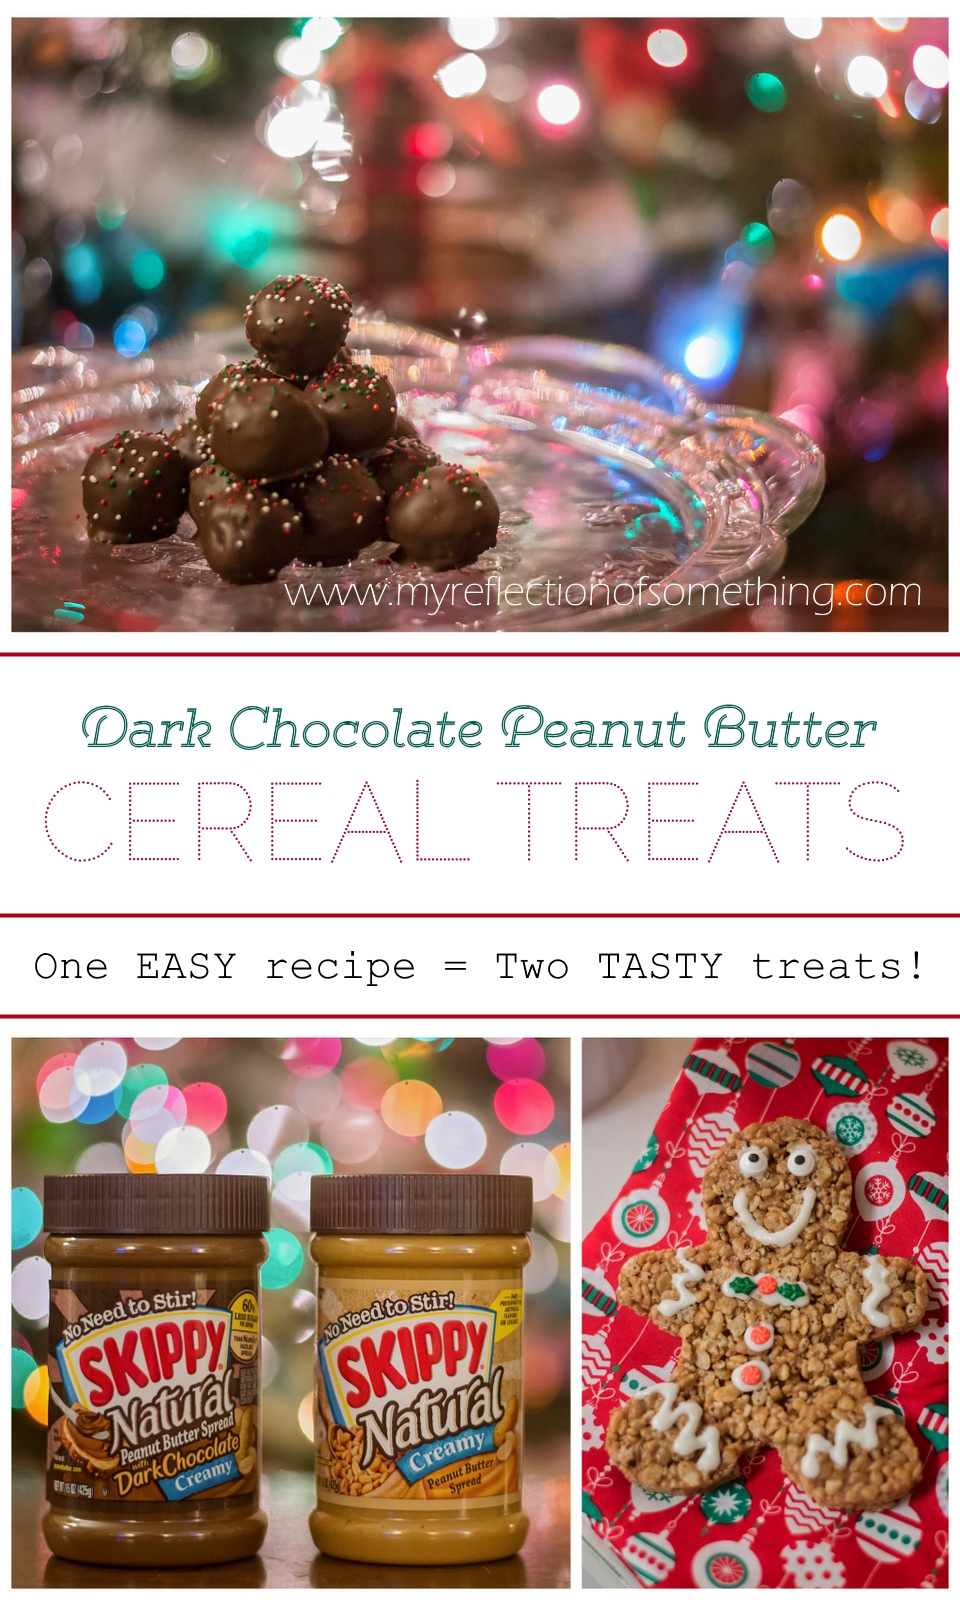 These quick and easy dark chocolate peanut butter cereal treats are the perfect choice for the holidays! One simple recipe gets you two fun and tasty desserts perfect for sharing! Add these to your Christmas cookie list, and grab a coupon for SKIPPY Natural to save on ingredients! #spon #SKIPPYYIPPEE